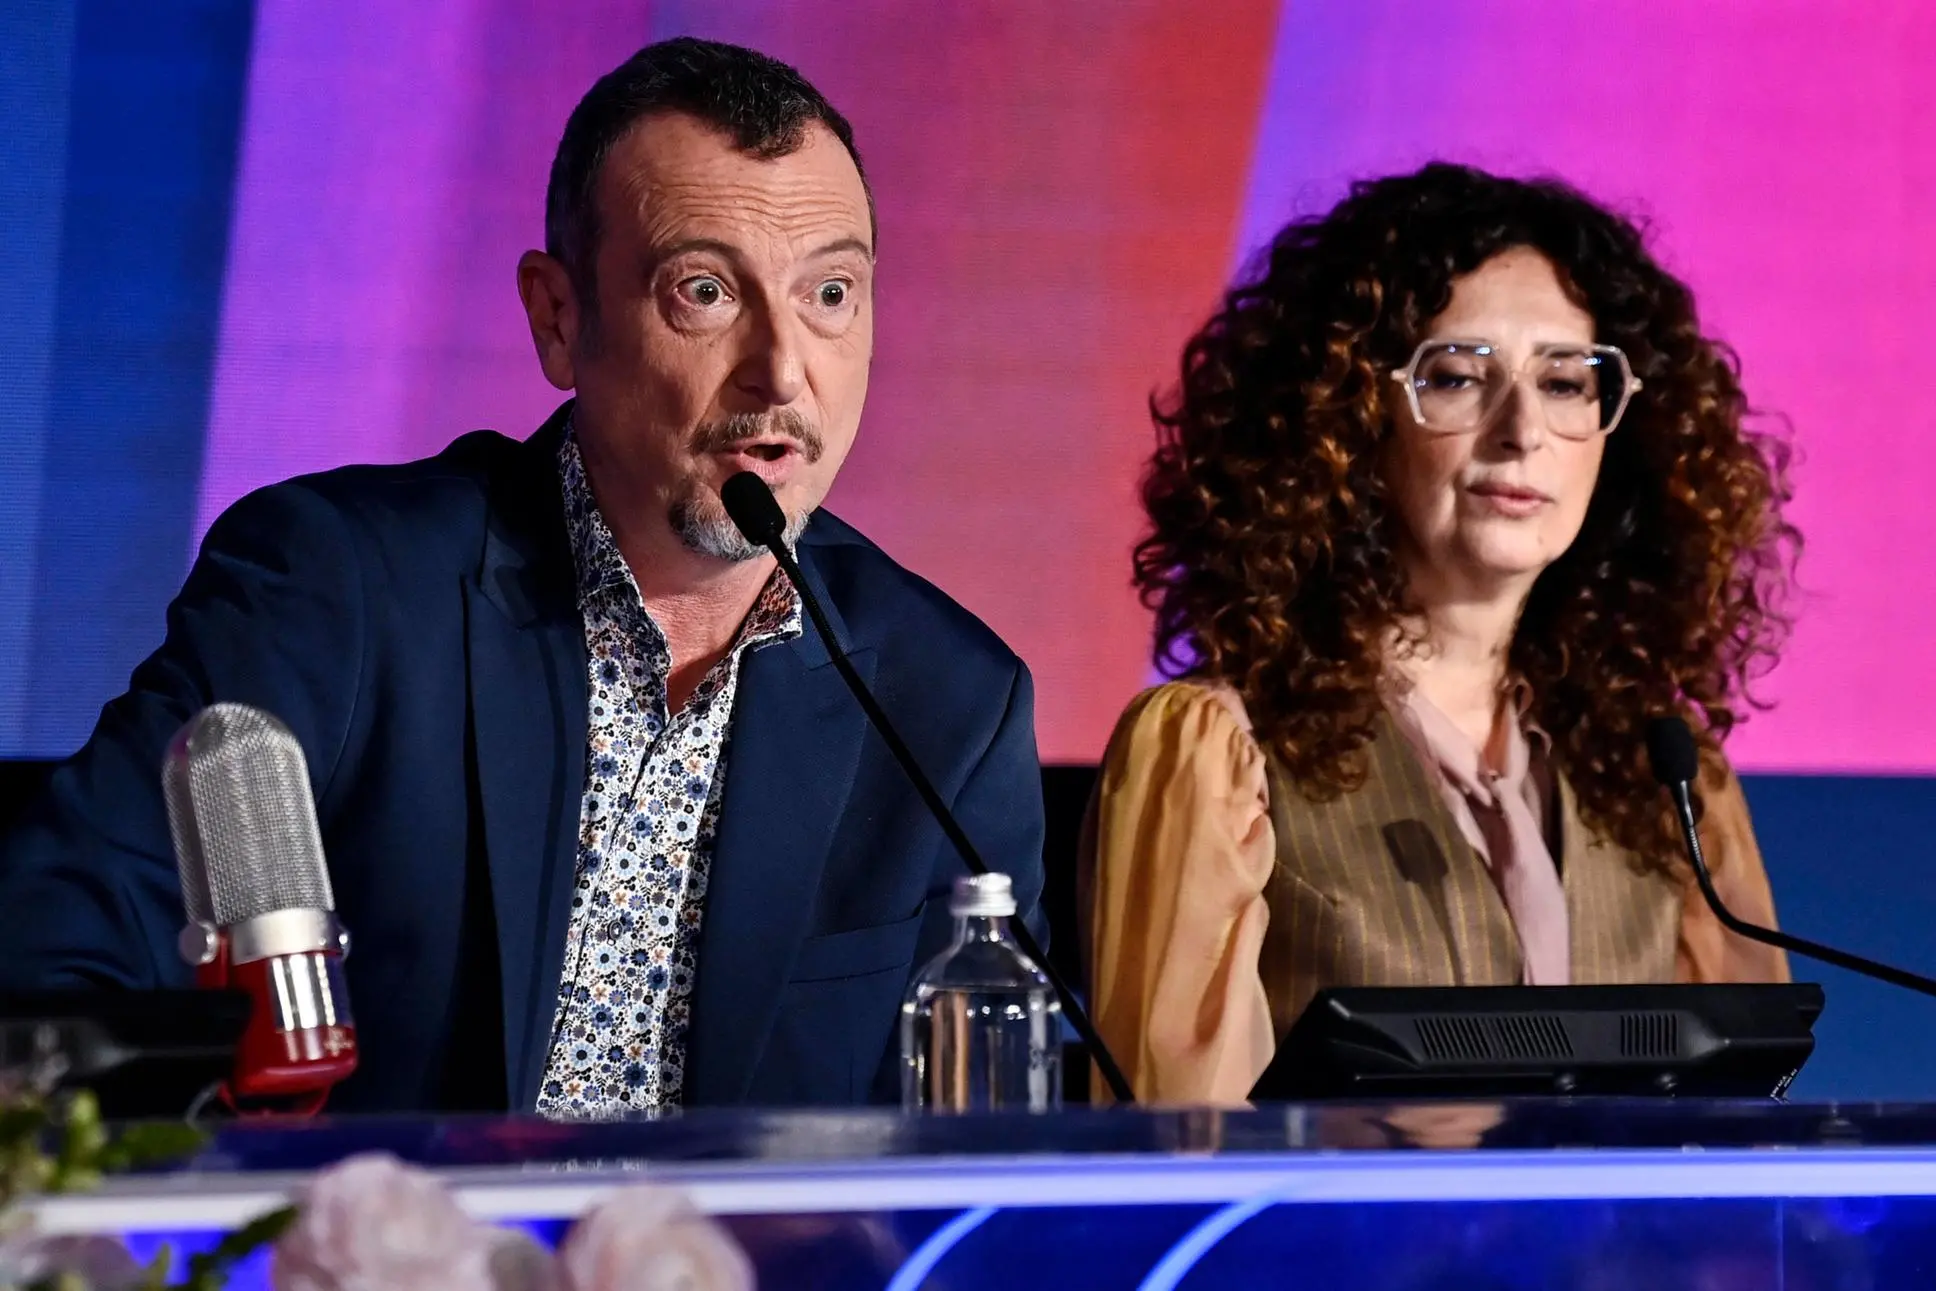 Sanremo Festival host and artistic director Amadeus (L) and Sanremo Festival co-host and Italian actress Teresa Mannino (R) during a press conference at the 74th Sanremo Italian Song Festival, Sanremo, Italy, 08 February 2024. The festival runs from 06 to 10 February 2024. ANSA/RICCARDO ANTIMIANI